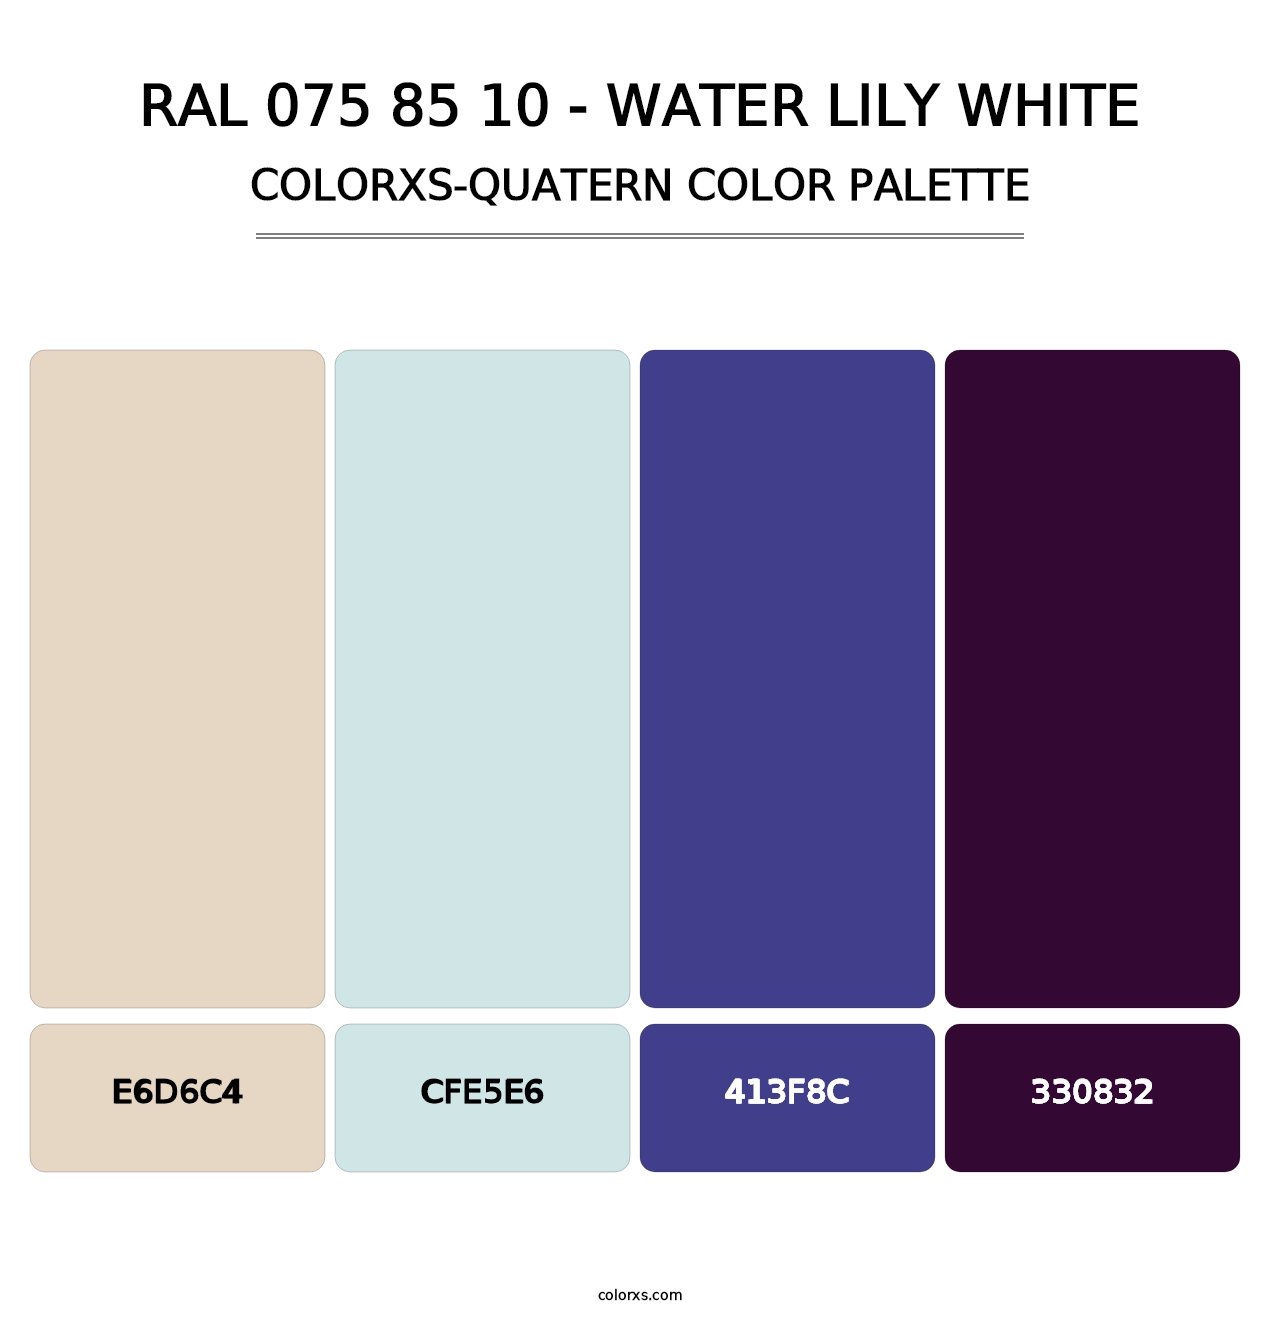 RAL 075 85 10 - Water Lily White - Colorxs Quatern Palette